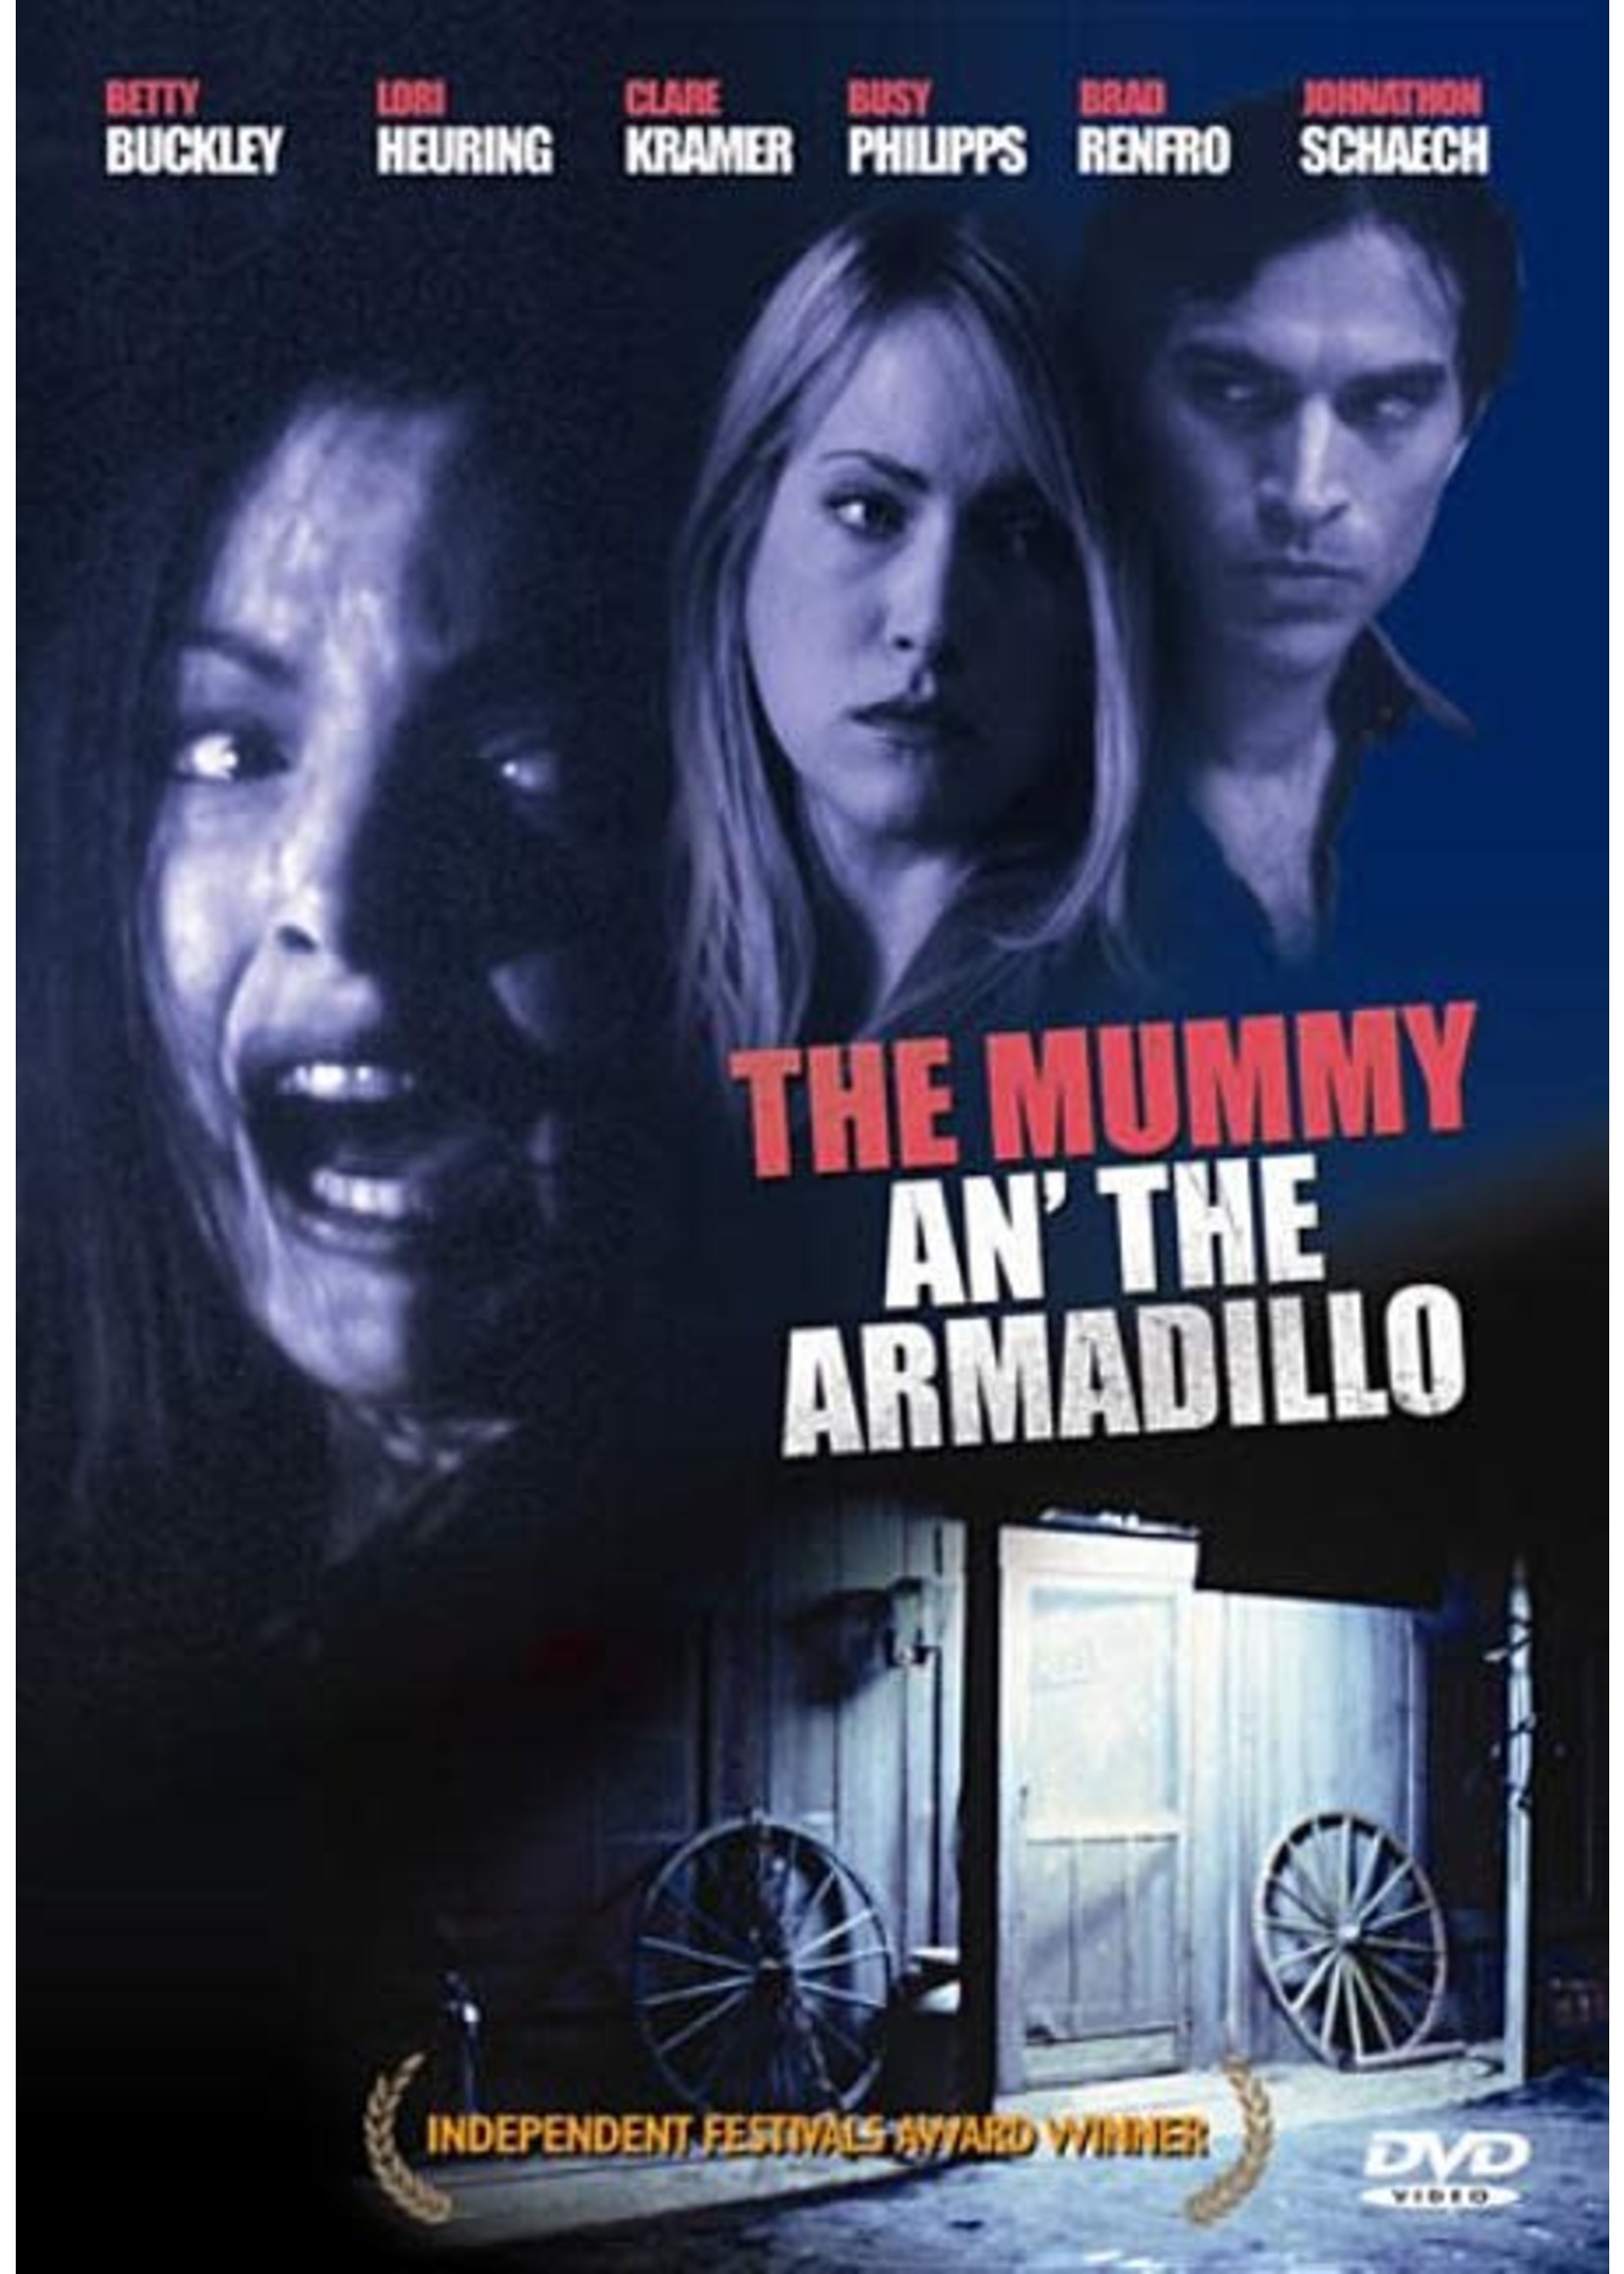 The Mummy an' the Armadillo (DVD)